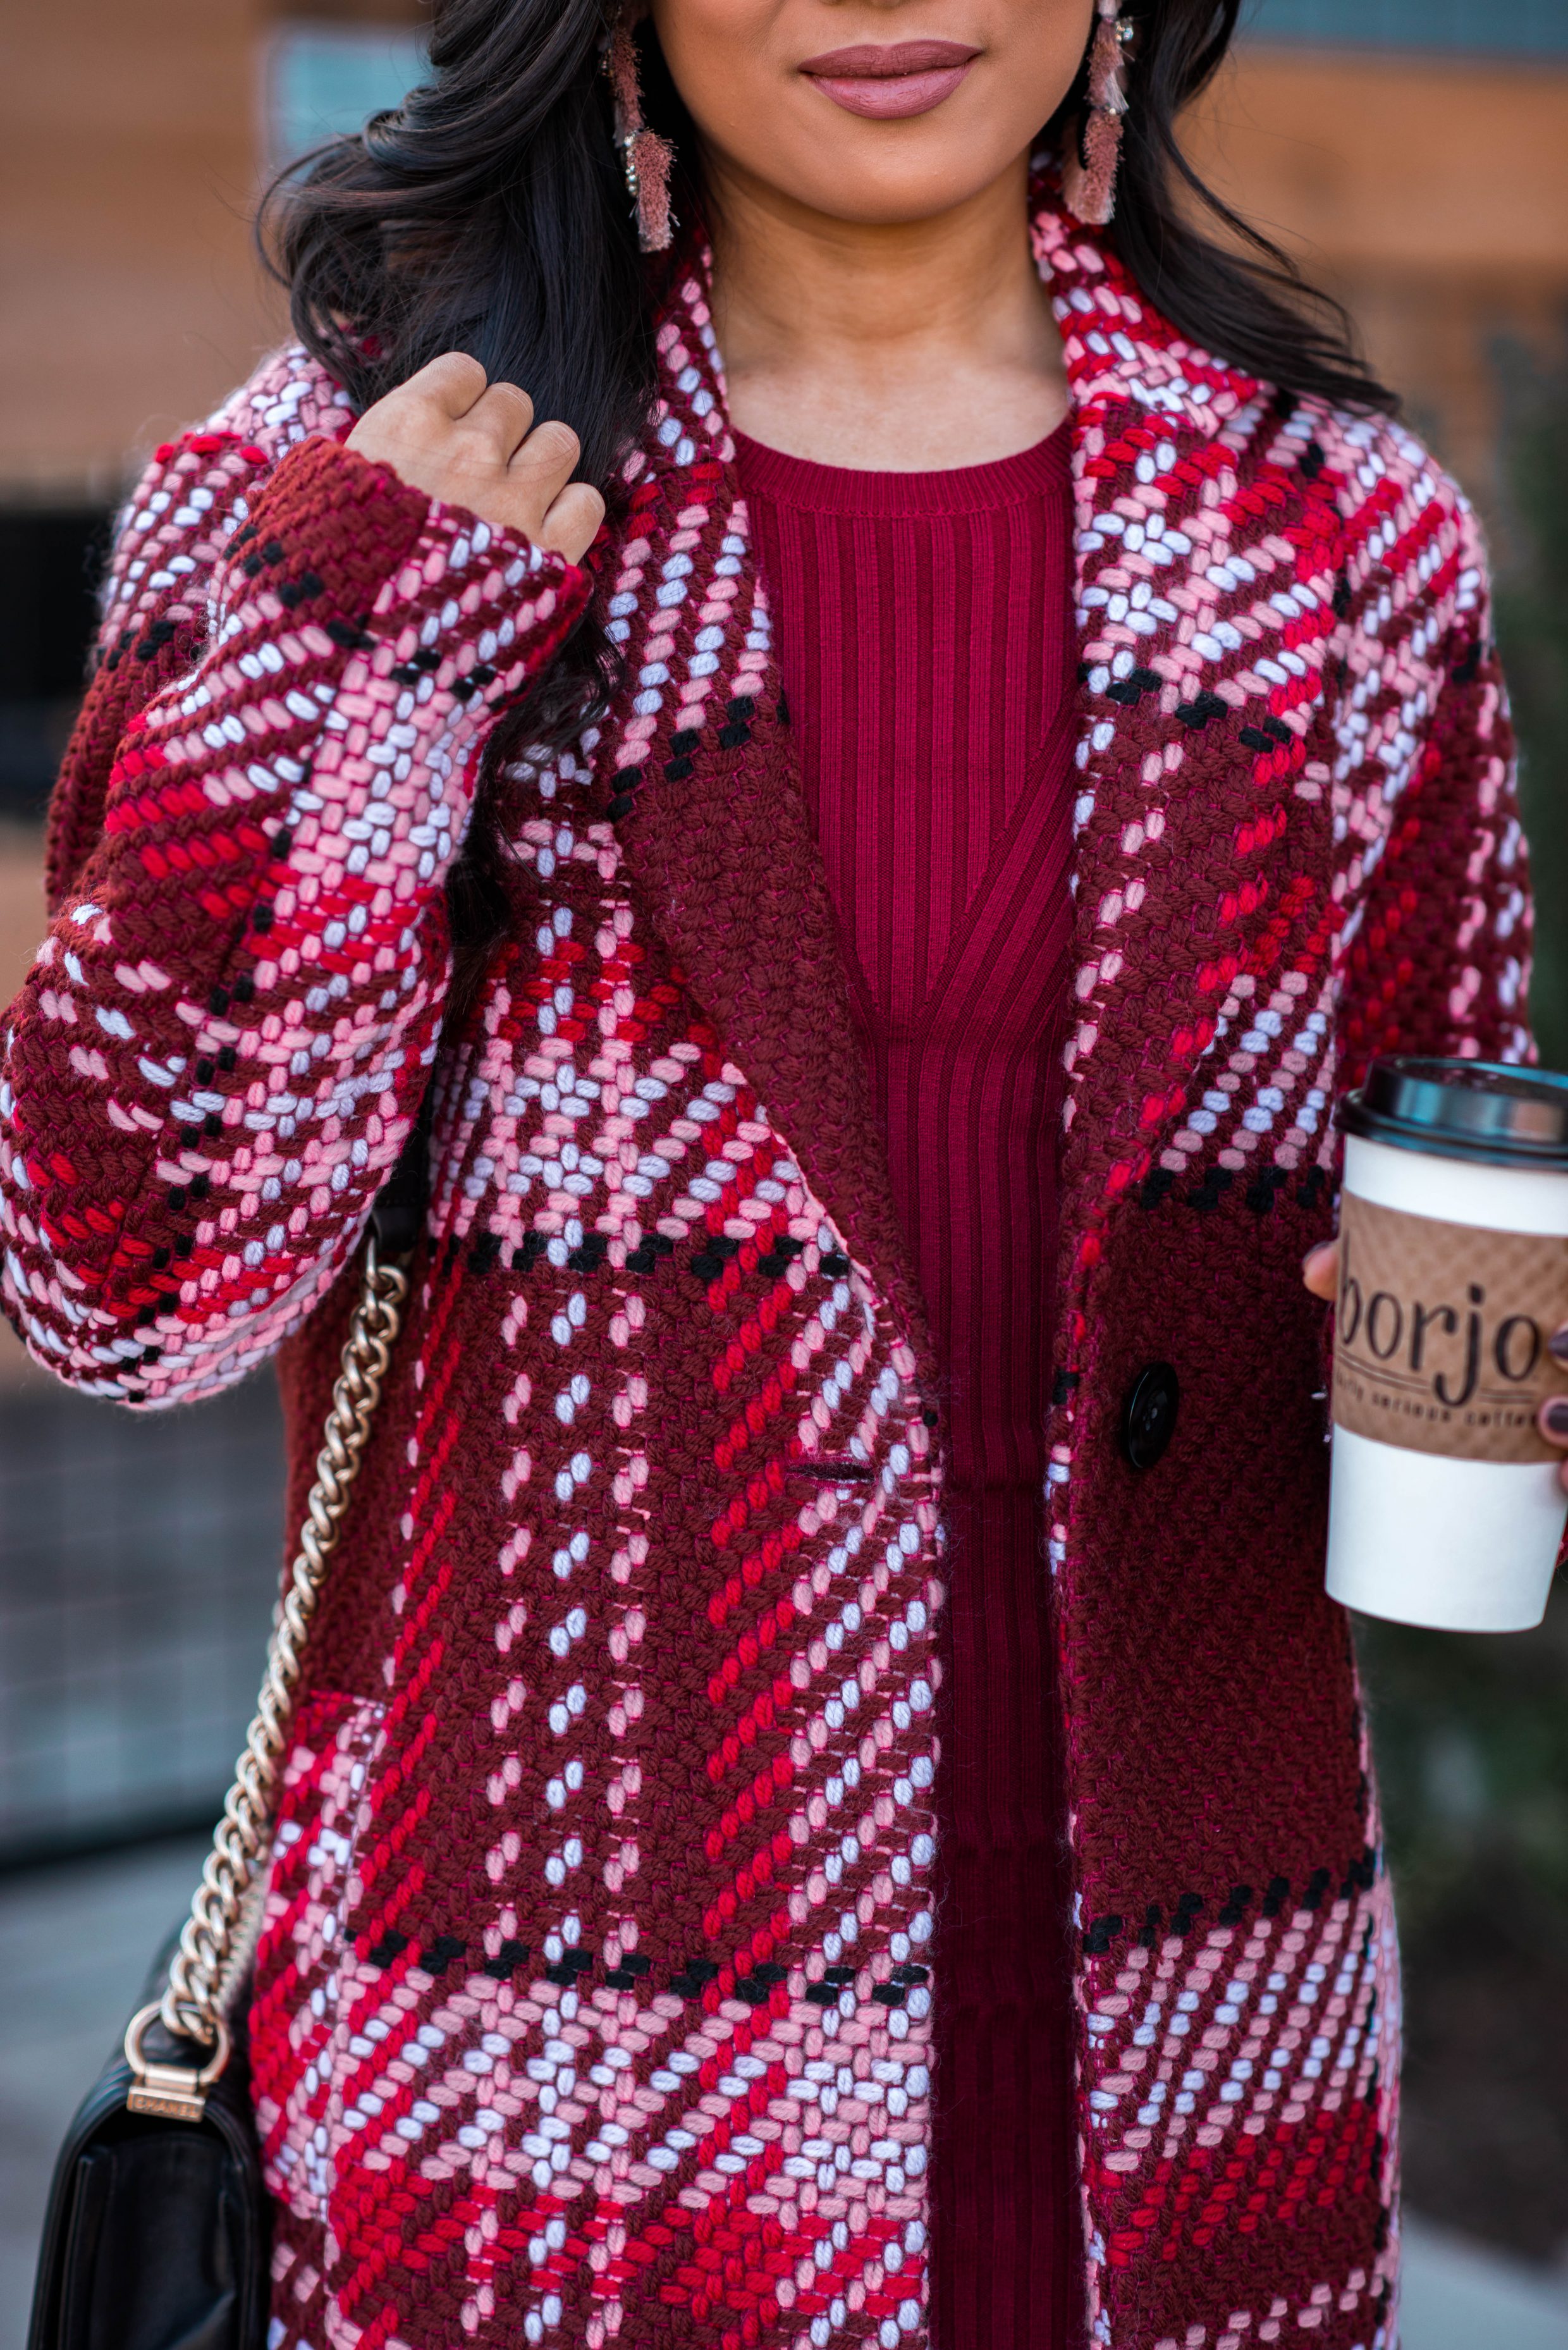 Blogger Hoang-Kim styles a plaid statement coat and sweater dress for fall and winter